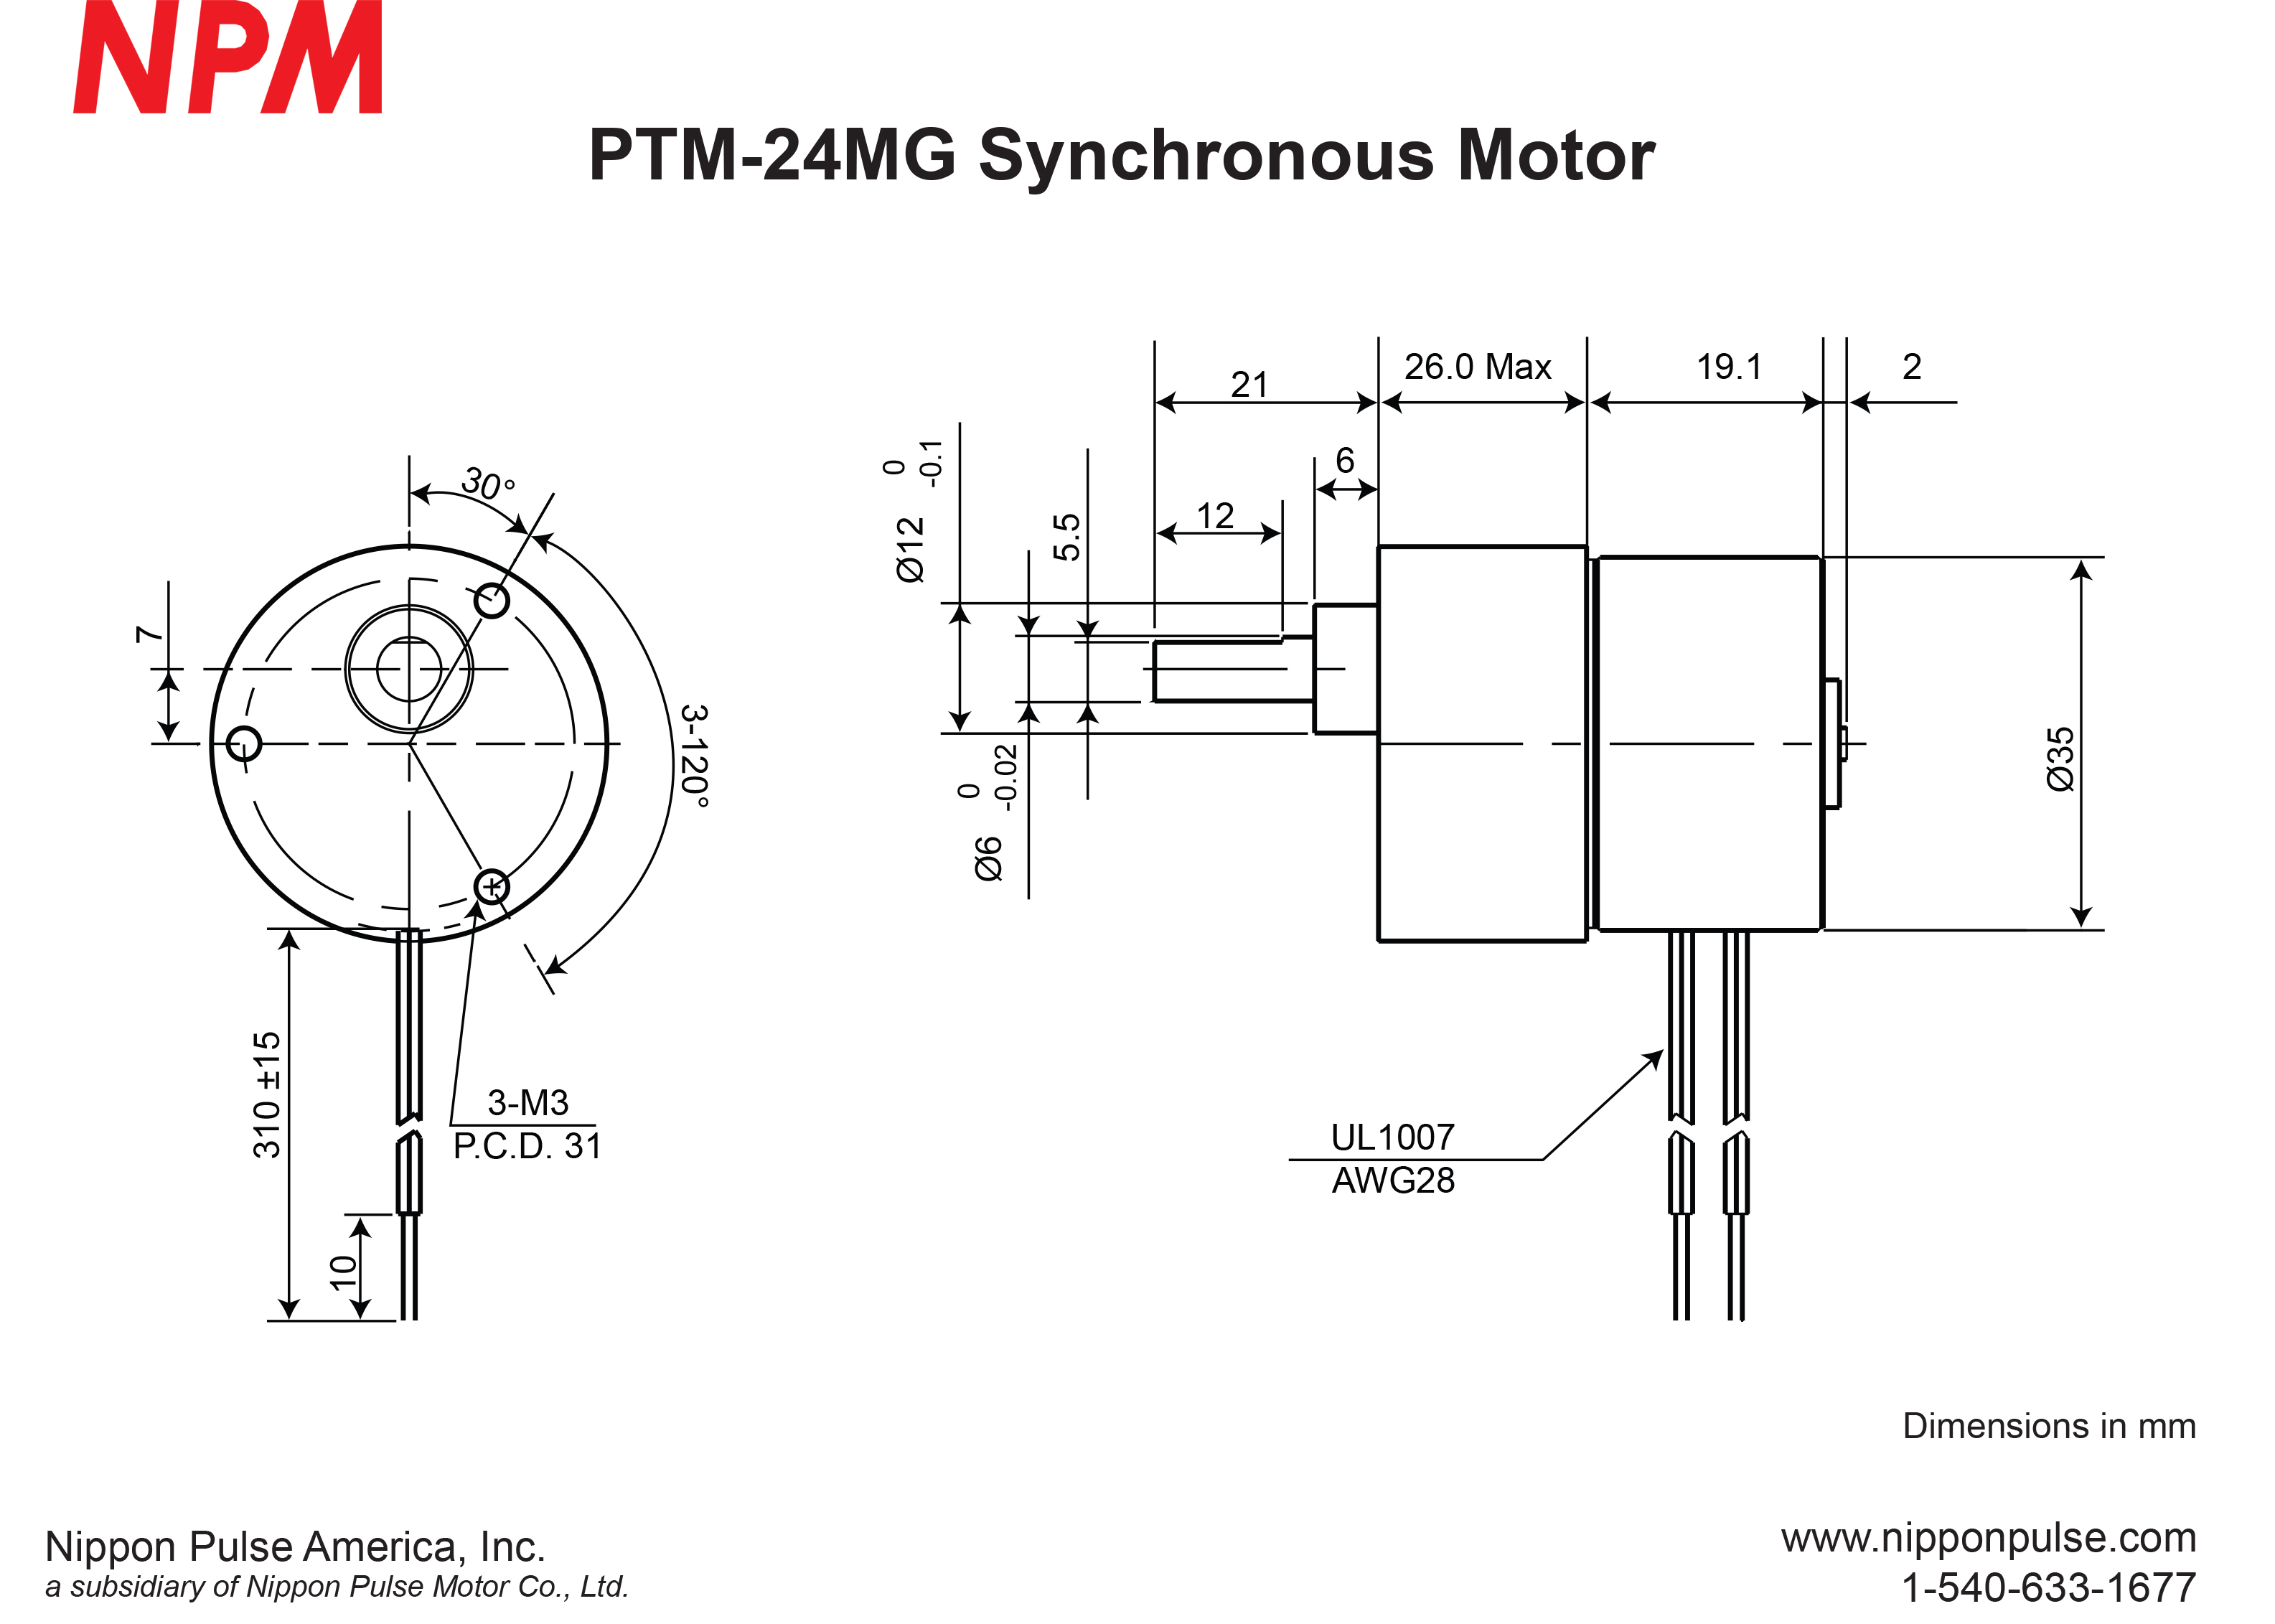 PTM-24MG(1/75) system drawing